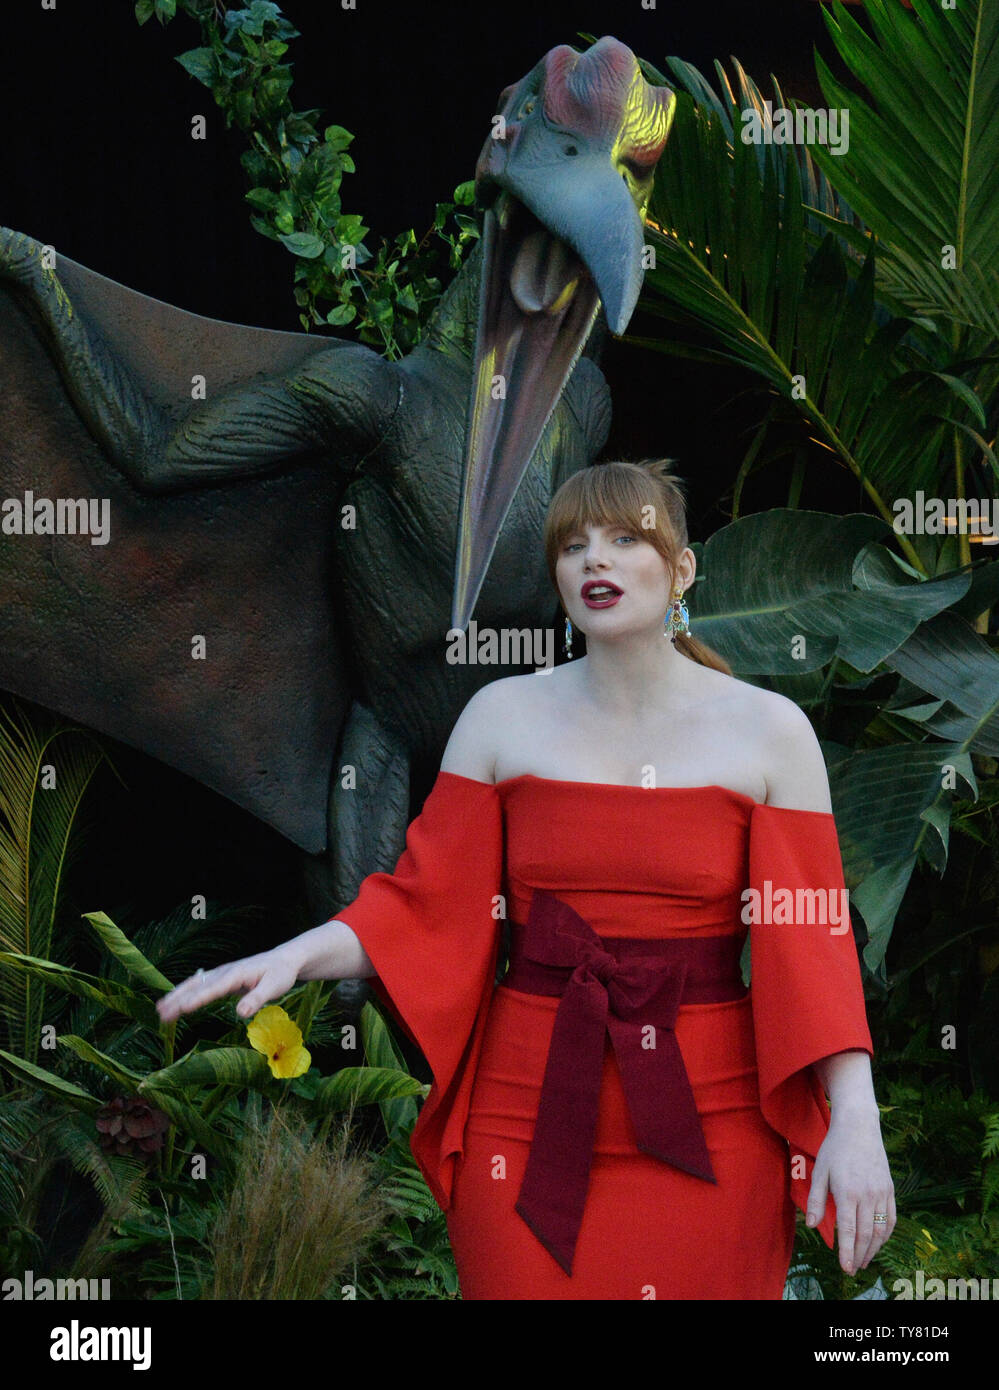 Cast member Bryce Dallas Howard attends the premiere of the sci-fi motion  picture 